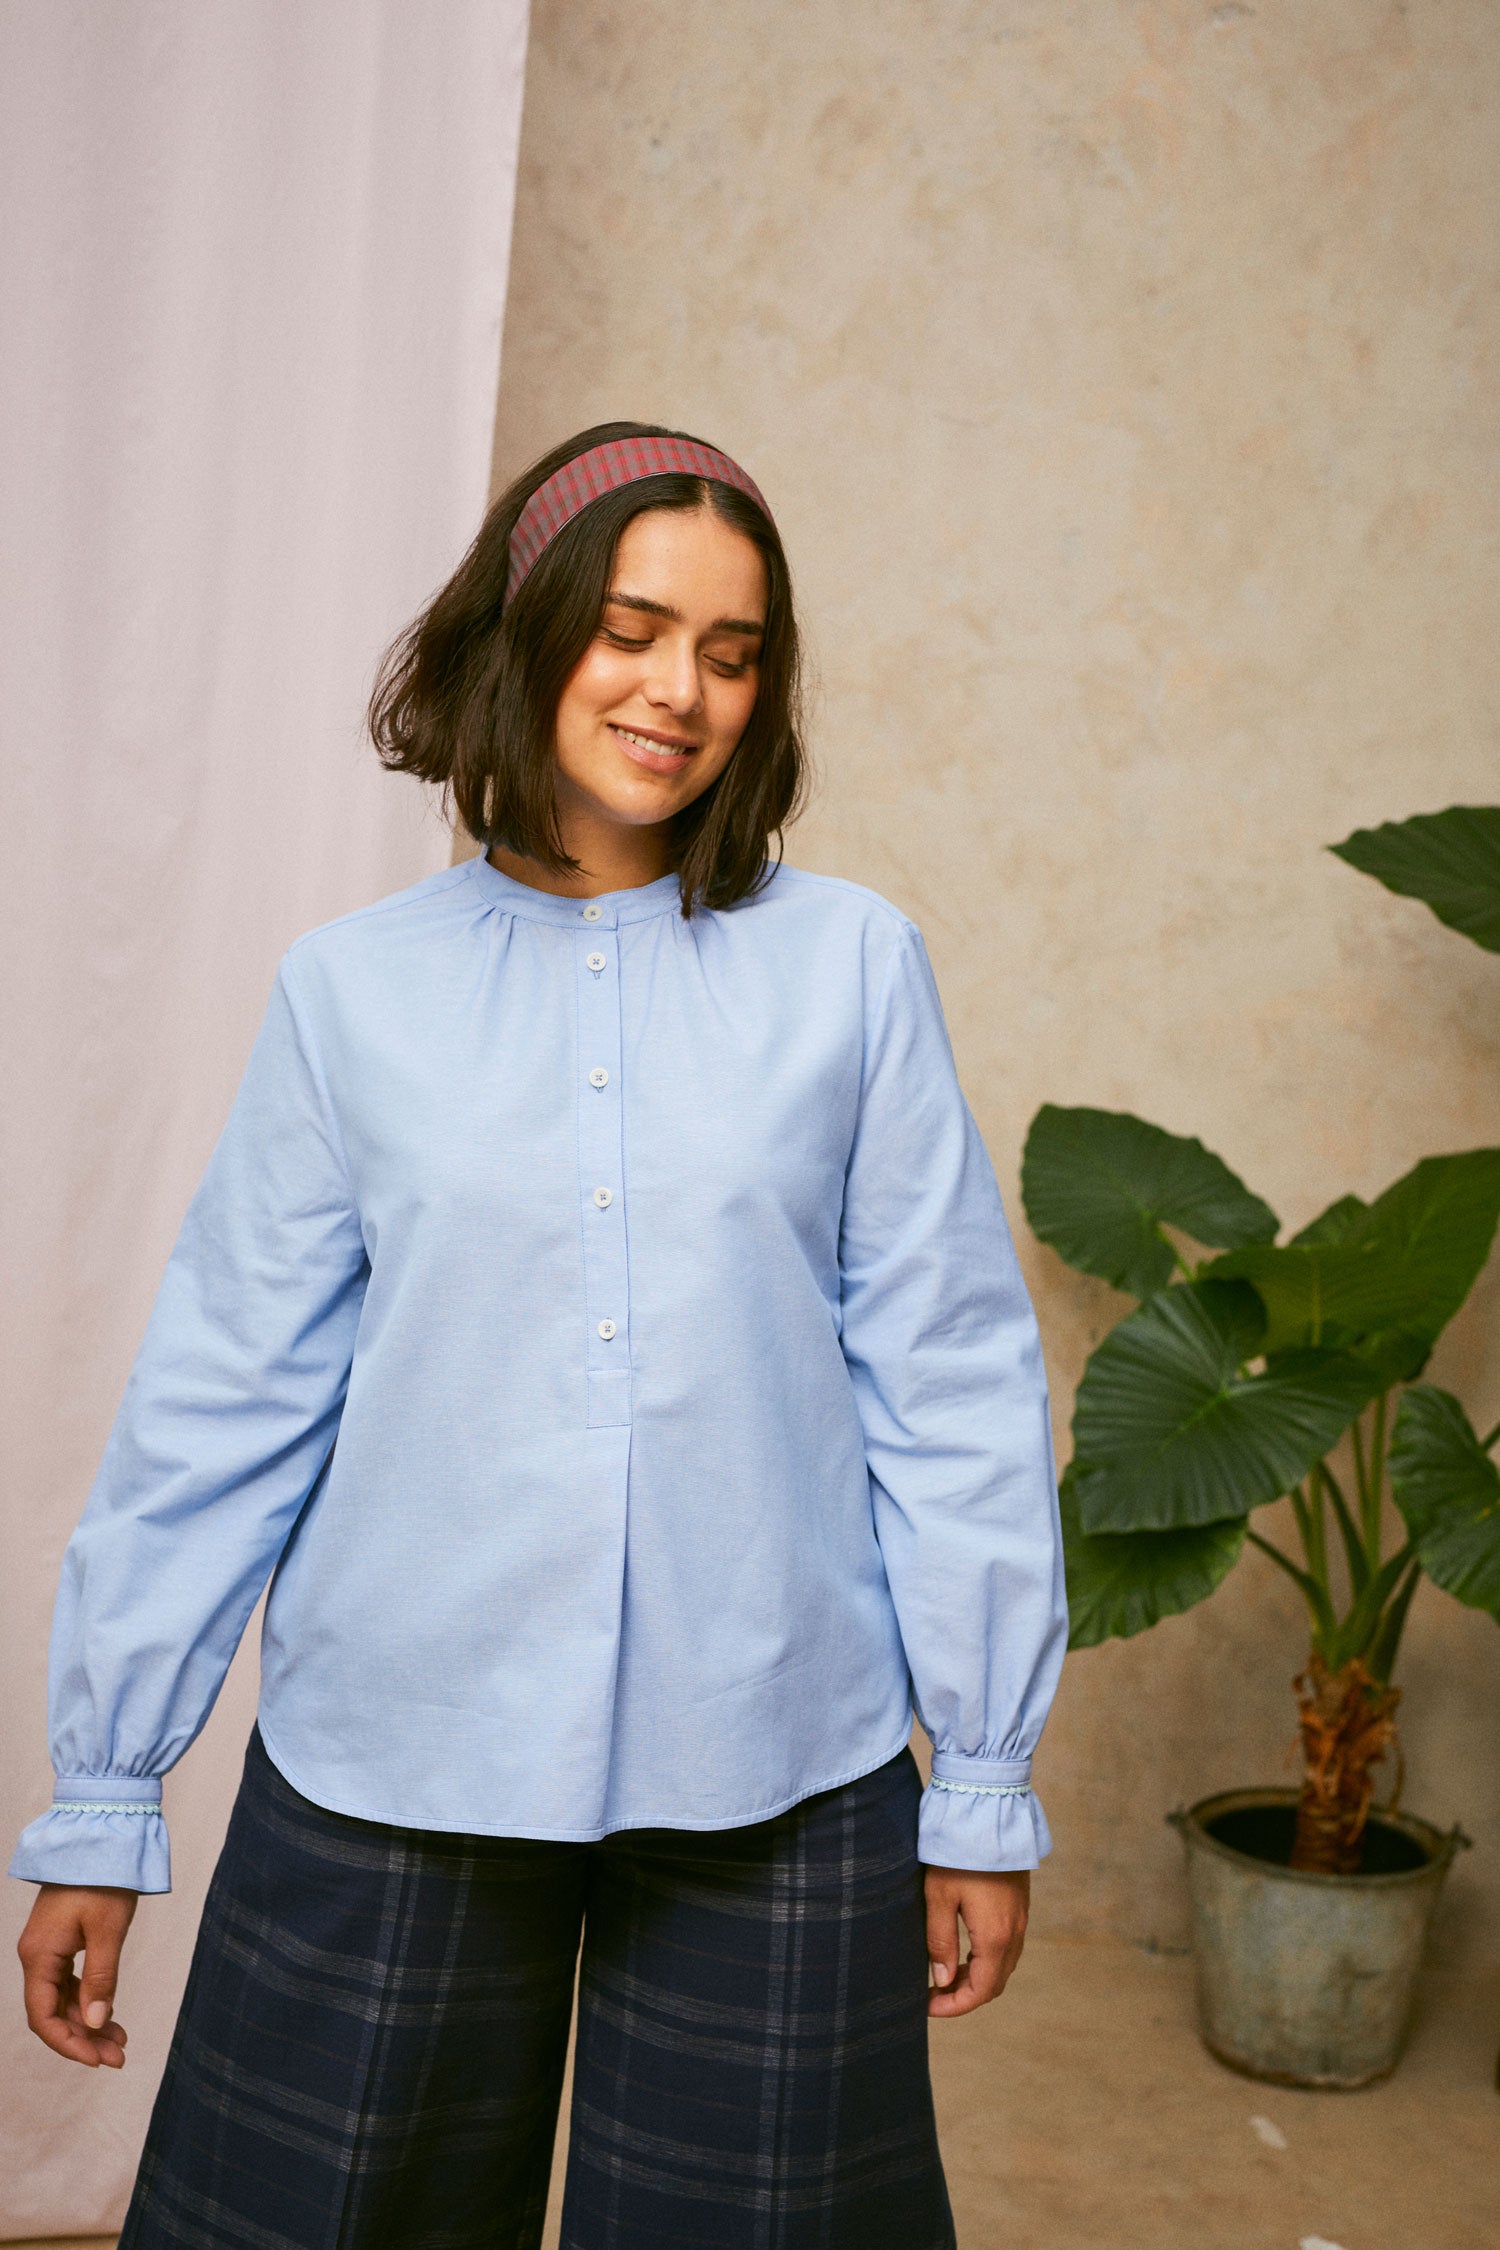 Model wears Saywood's pale blue shirt, the Marie A-Line Blouse, with navy check Amelia wide leg trousers. The red check Heidi Headband is worn in her her. A plant and drop of pink fabric can be seen in the background. 